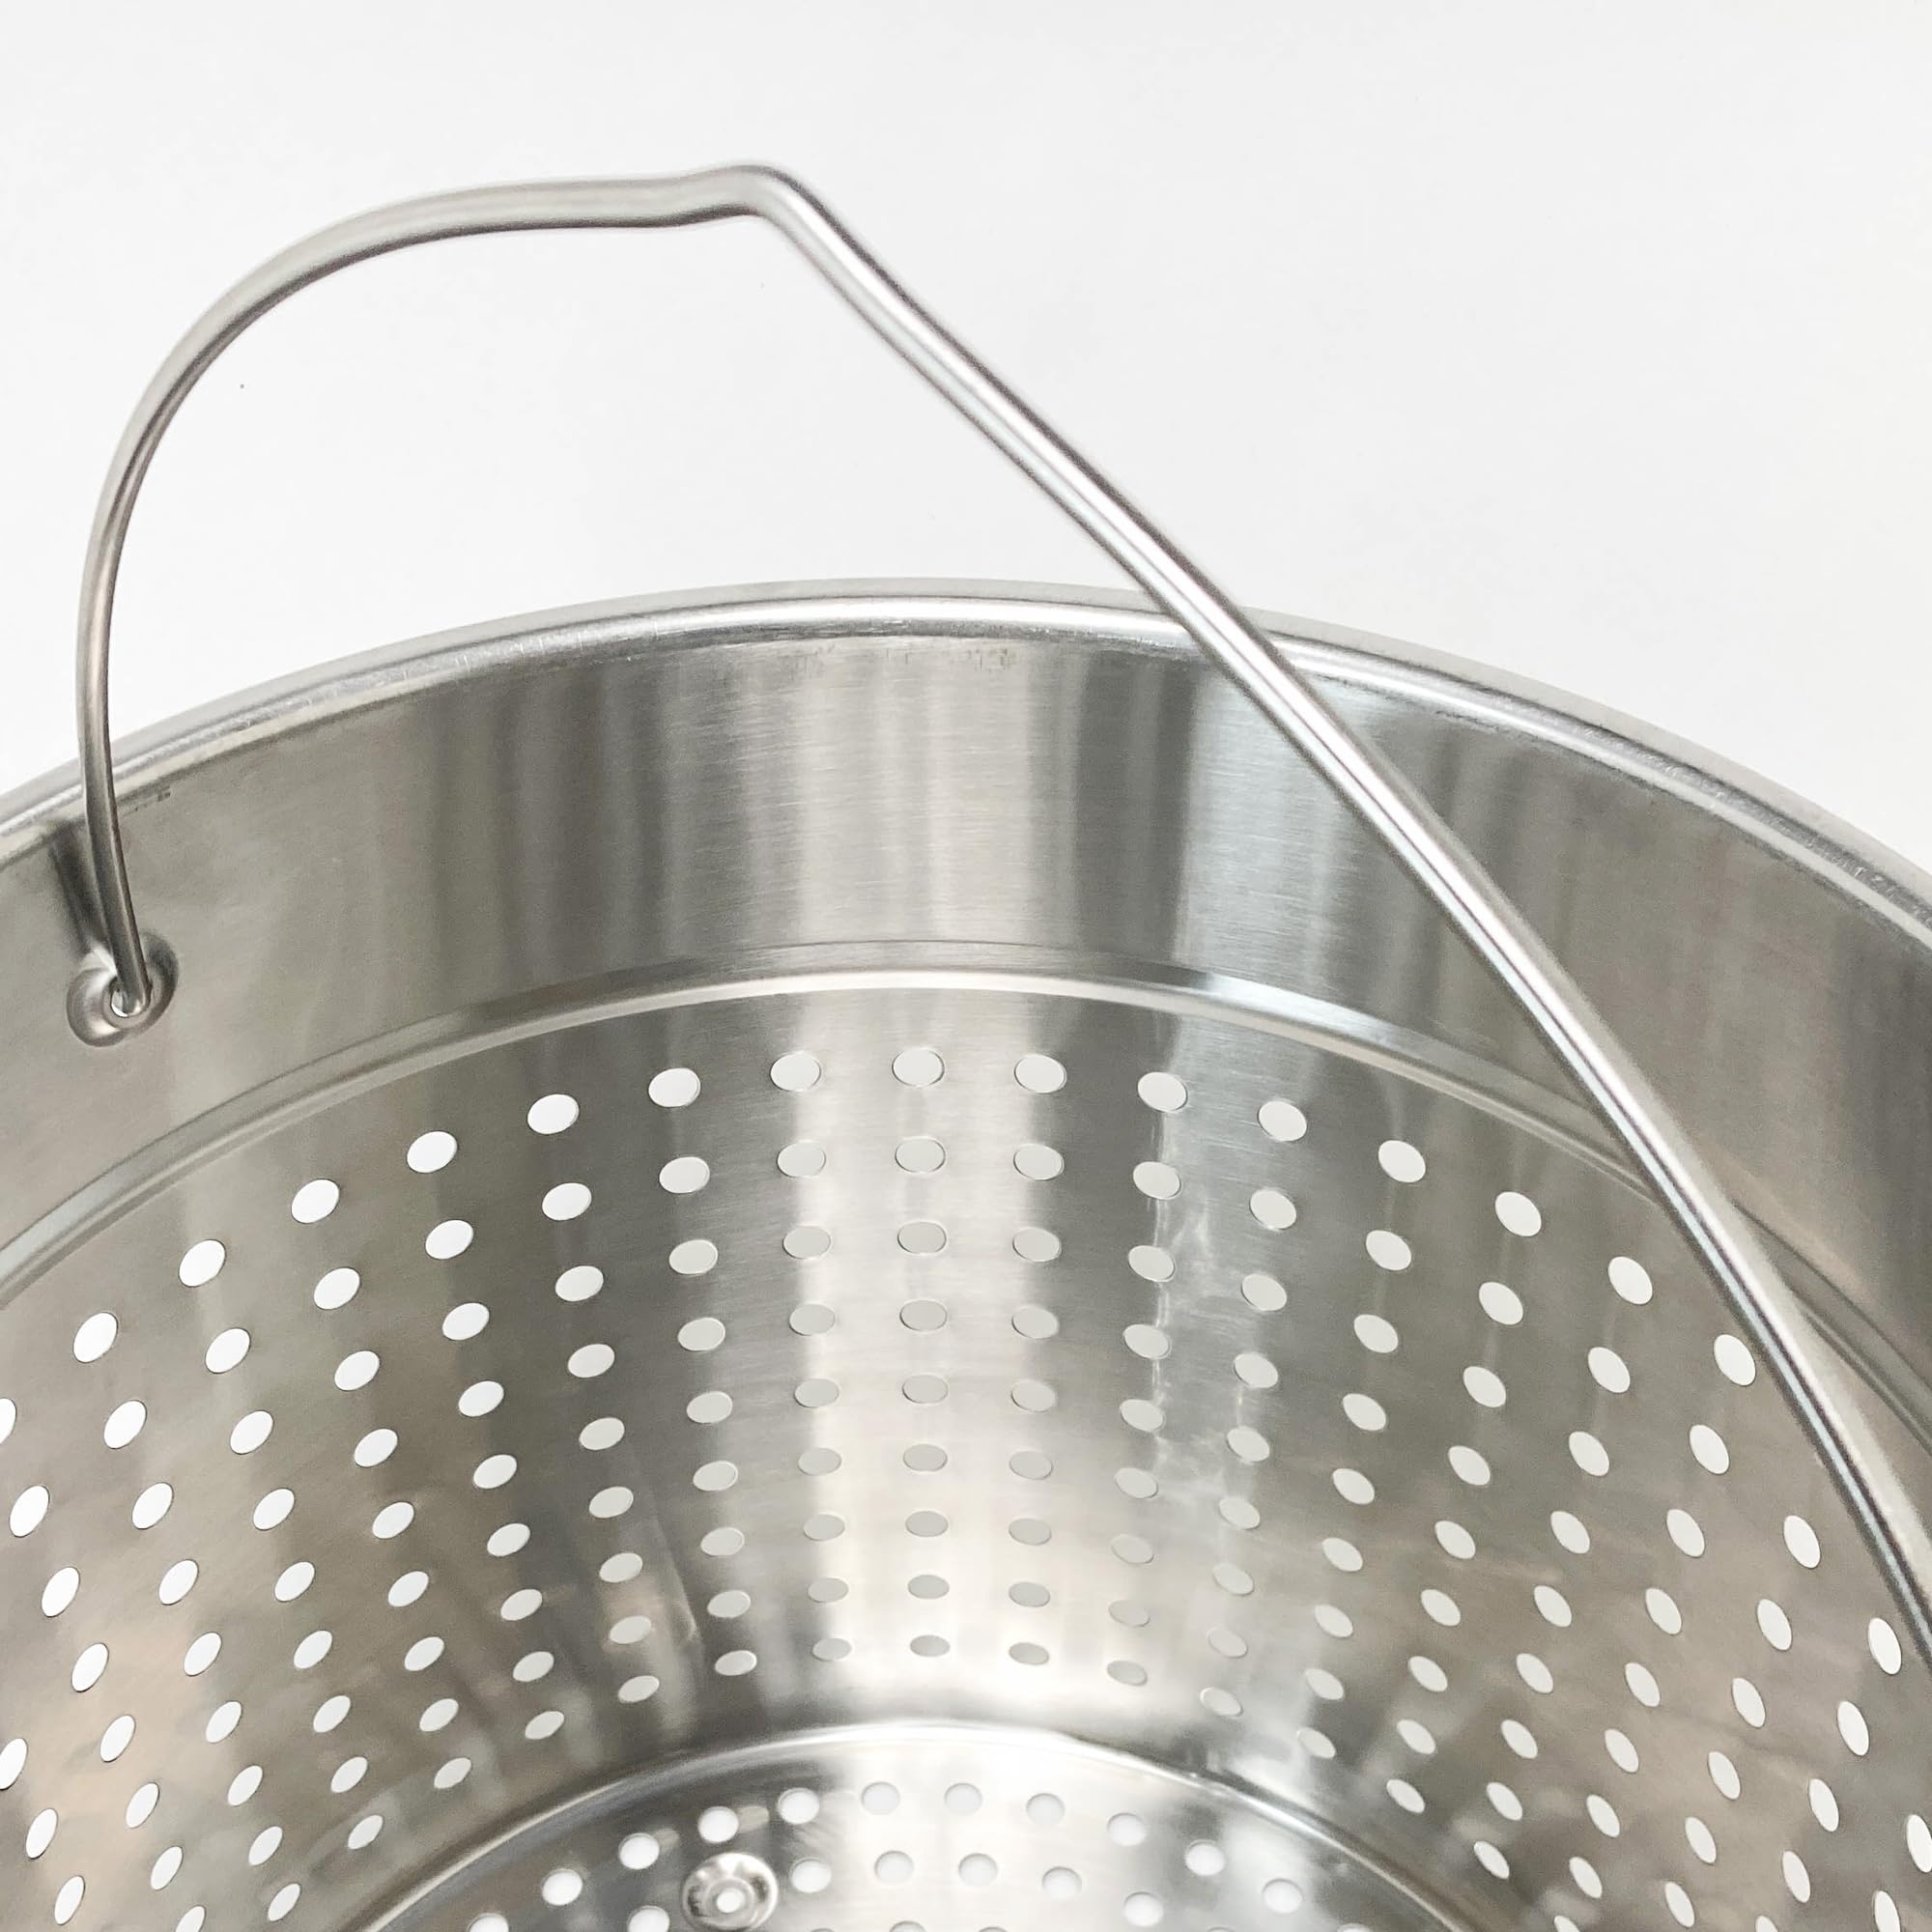 Bayou Classic 1160 62-qt Stainless Stockpot w/Stainless Perforated Basket Features Heavy Welded Loop Handles Domed Vented Lid Perfect For Steaming Boiling Canning and Preserving